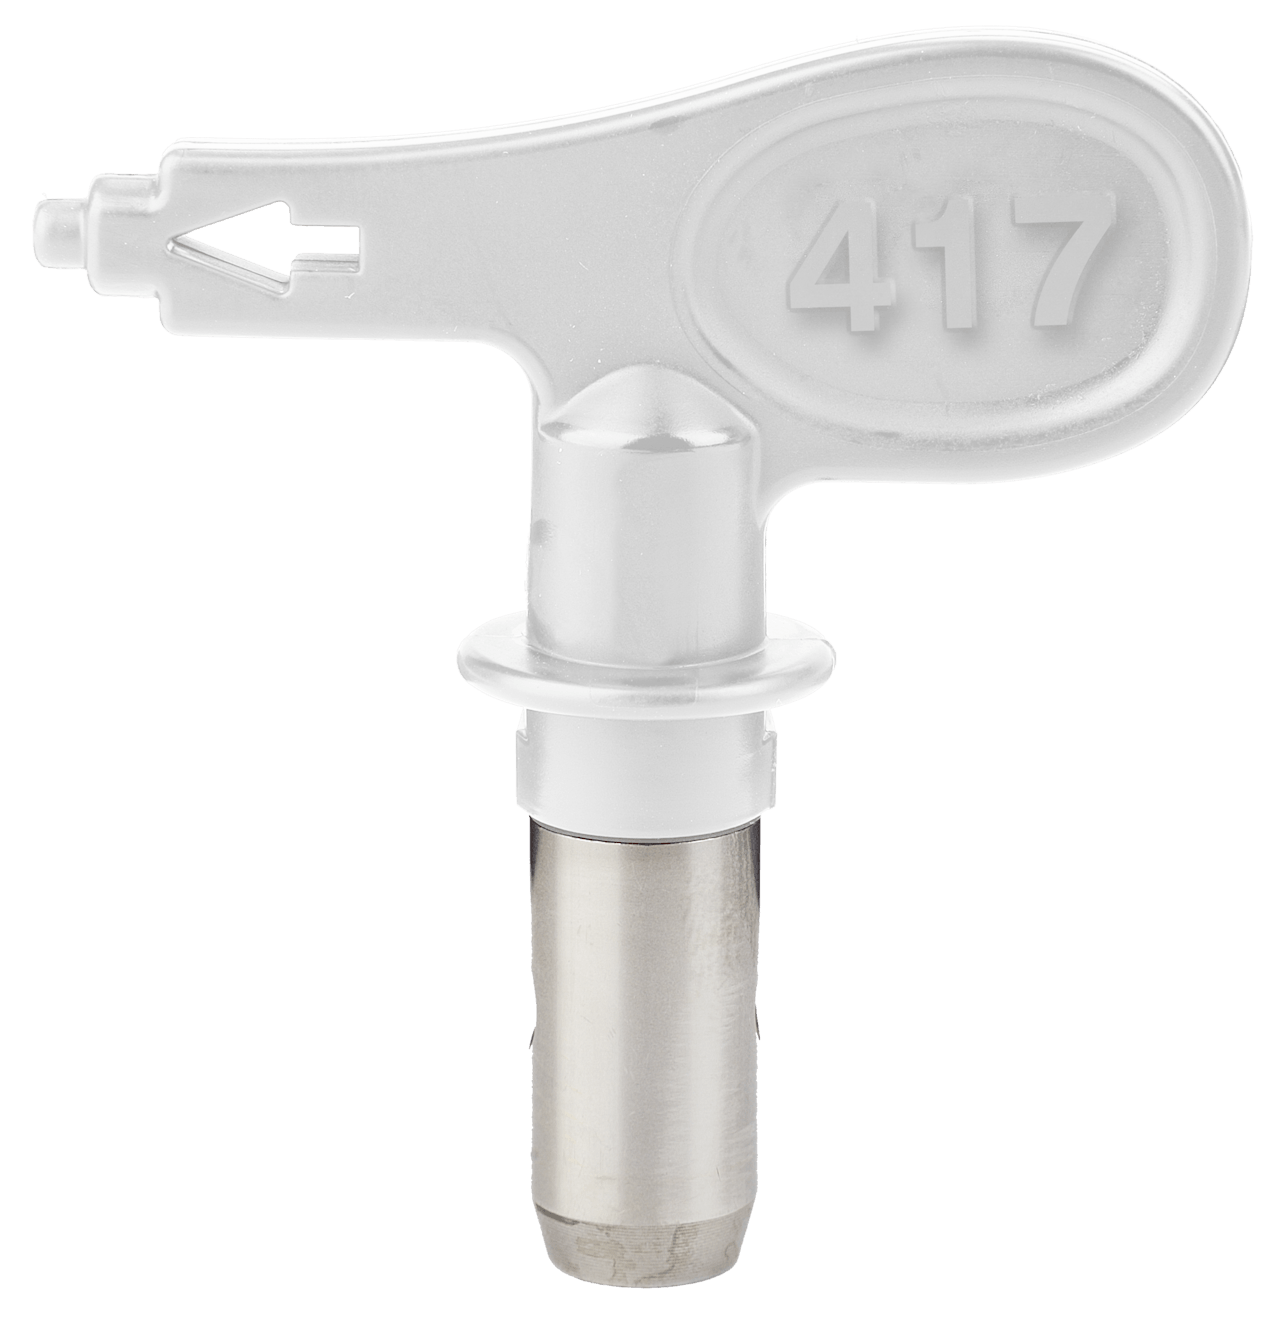 How to Choose the Right Paint Sprayer Tip for the Job